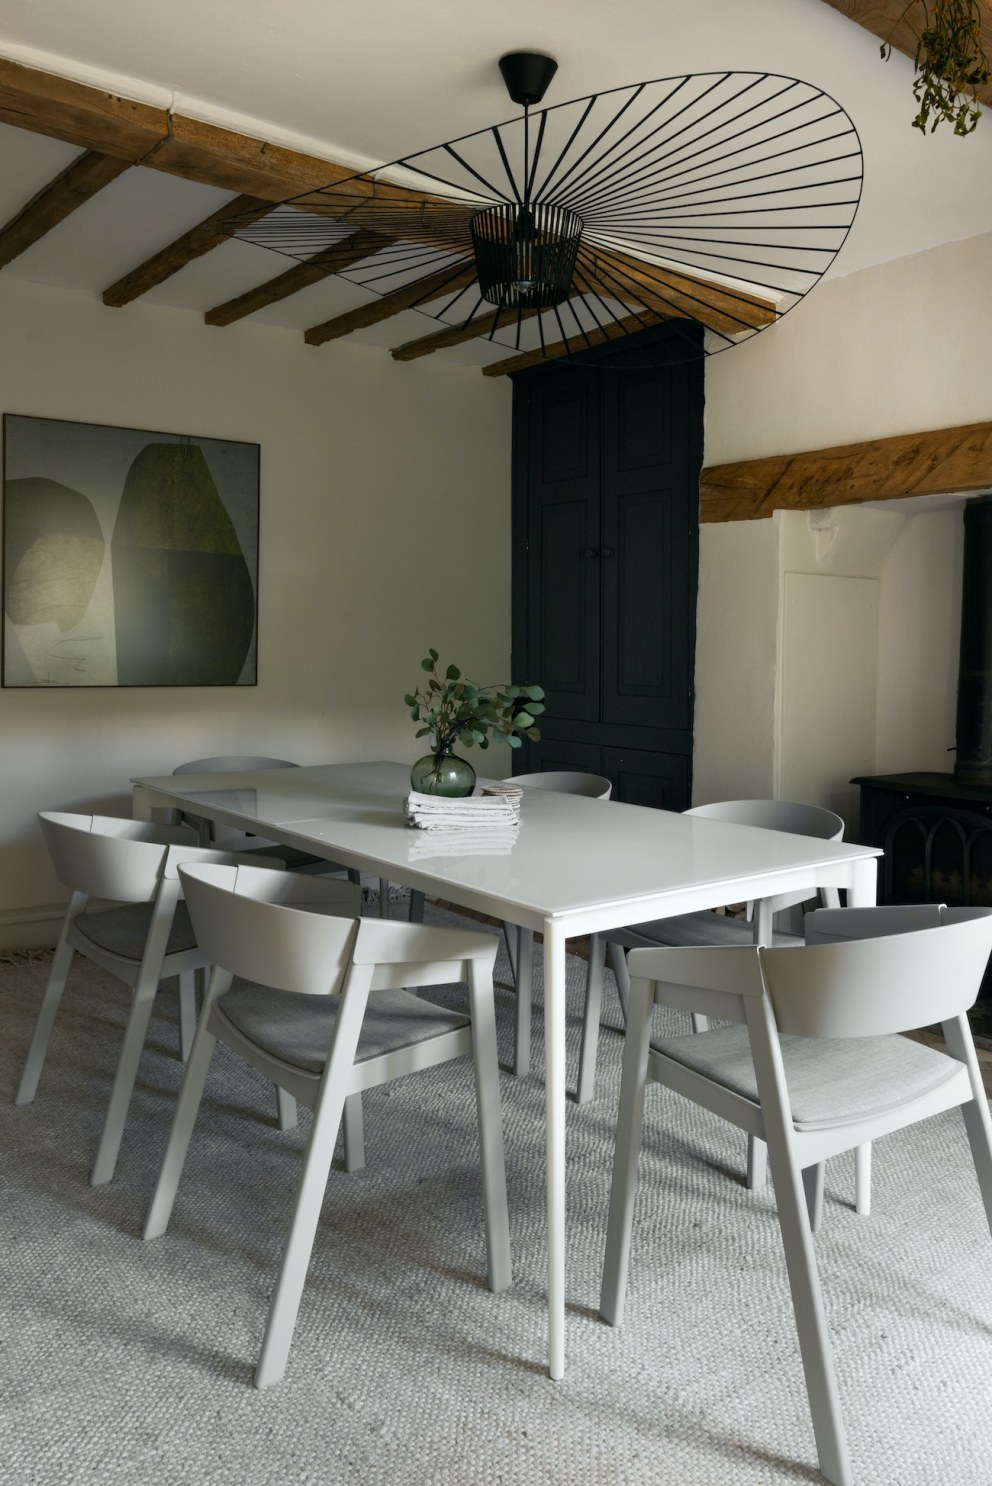 Shropshire Country Cottage | Dining area in boutique holiday let | Interior Designers